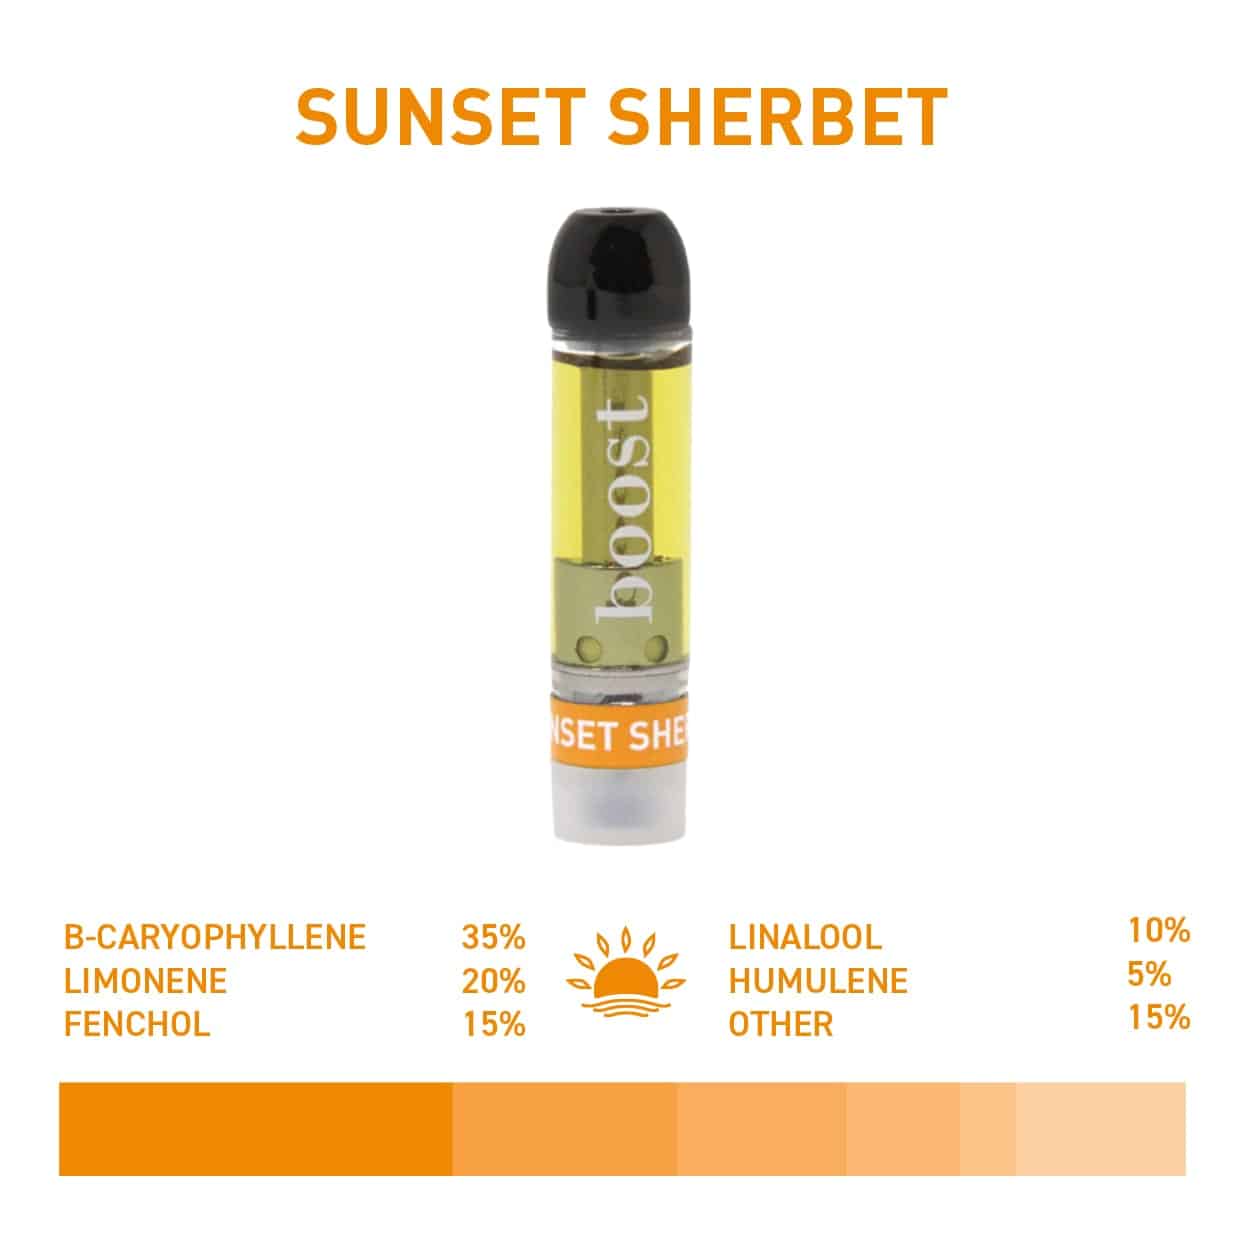 Boost THC Vape Cartridge Sunset Sherbet with 90 minutes Calgary weed delivery